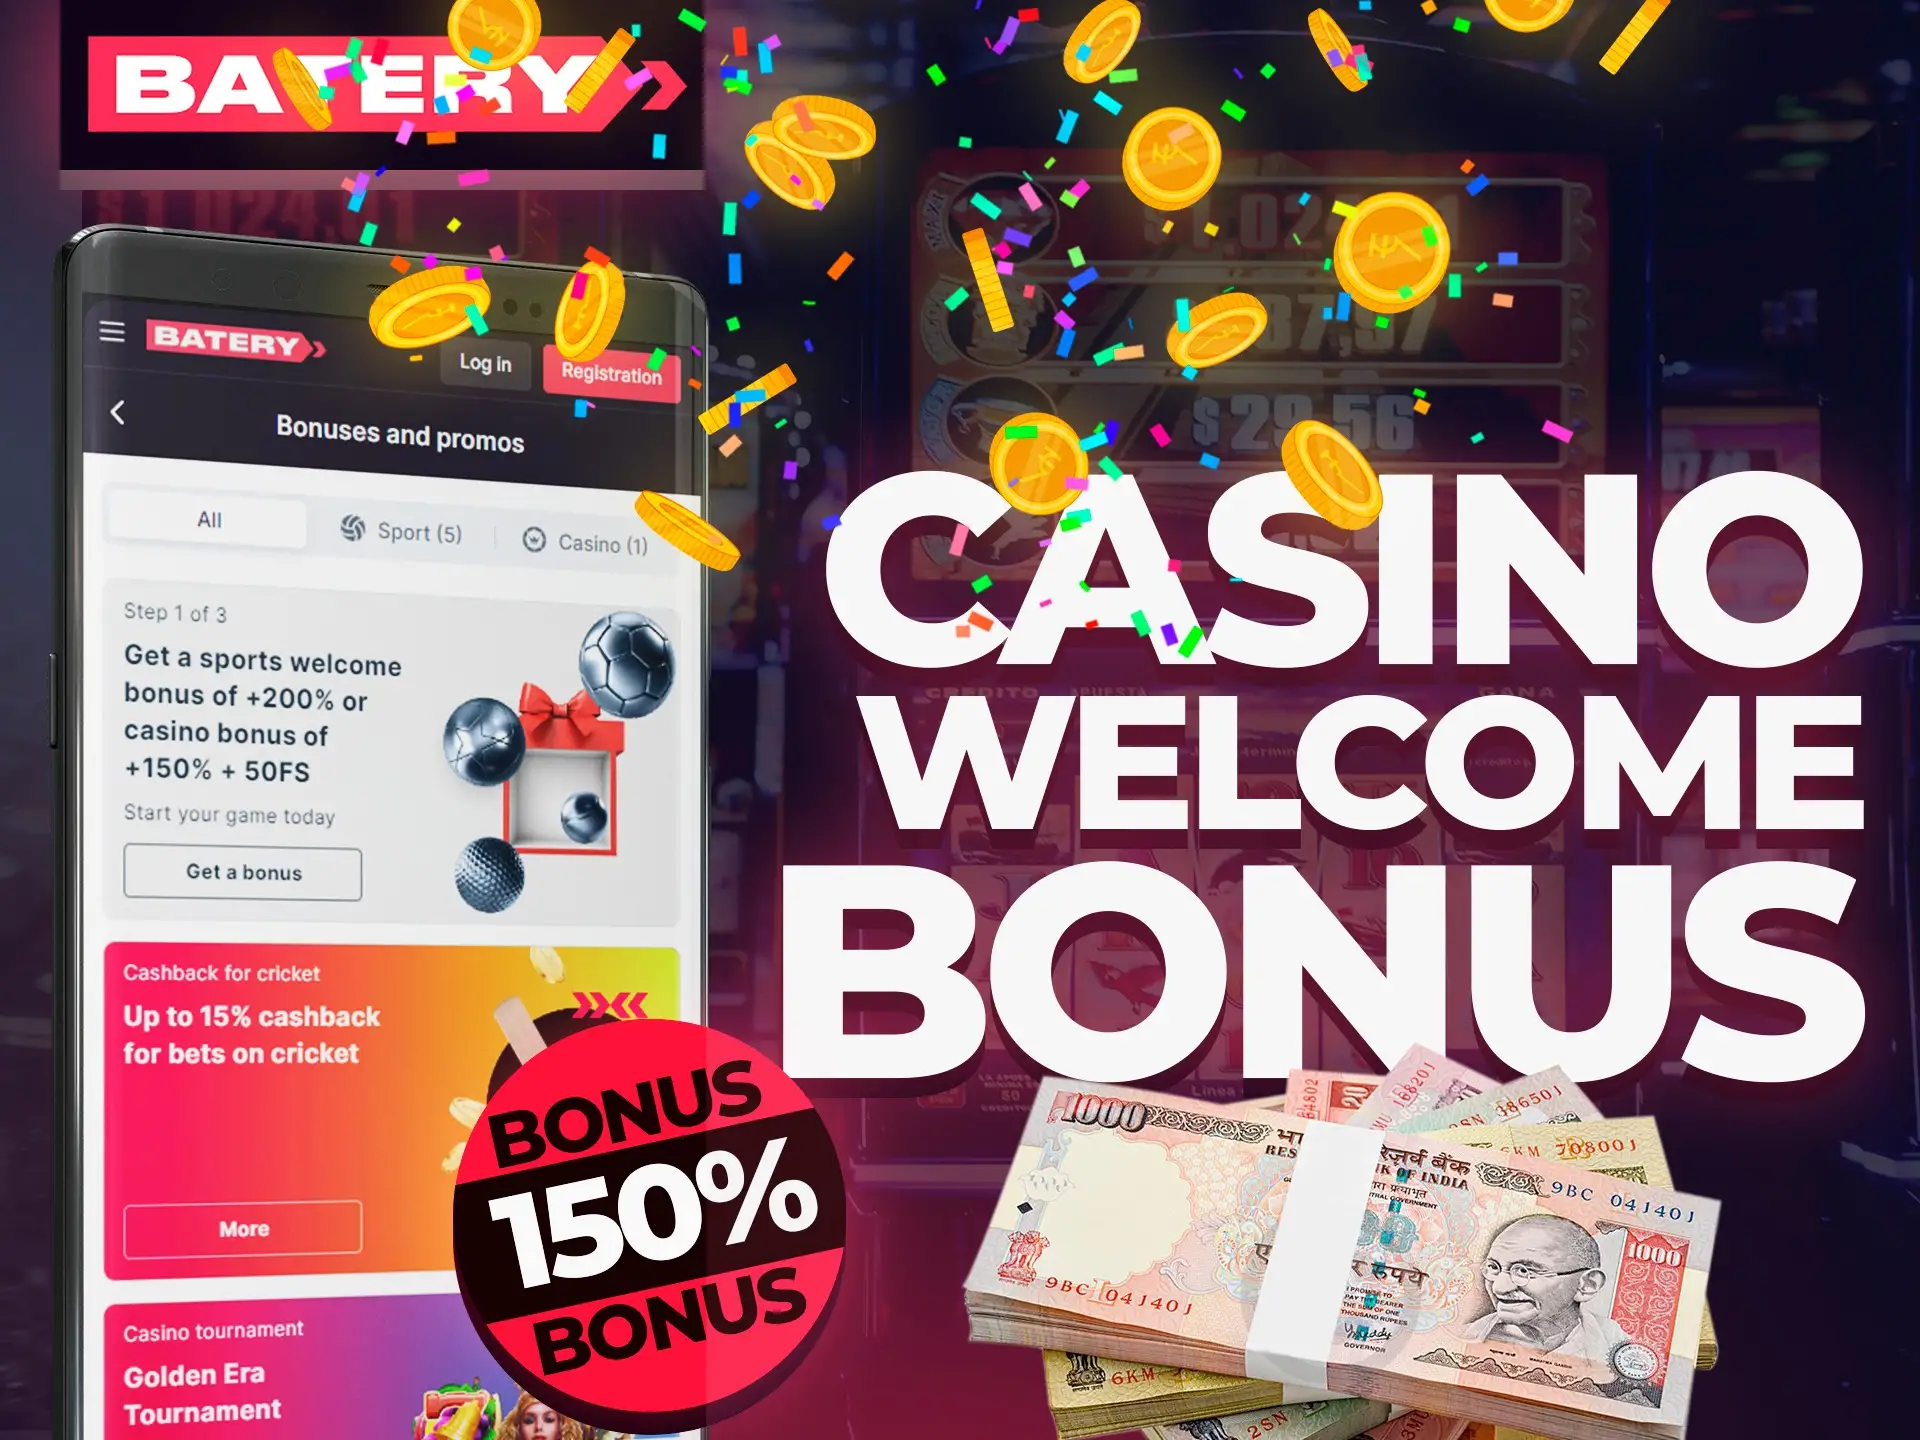 Get your casino welcome bonus after first deposit at Batery.